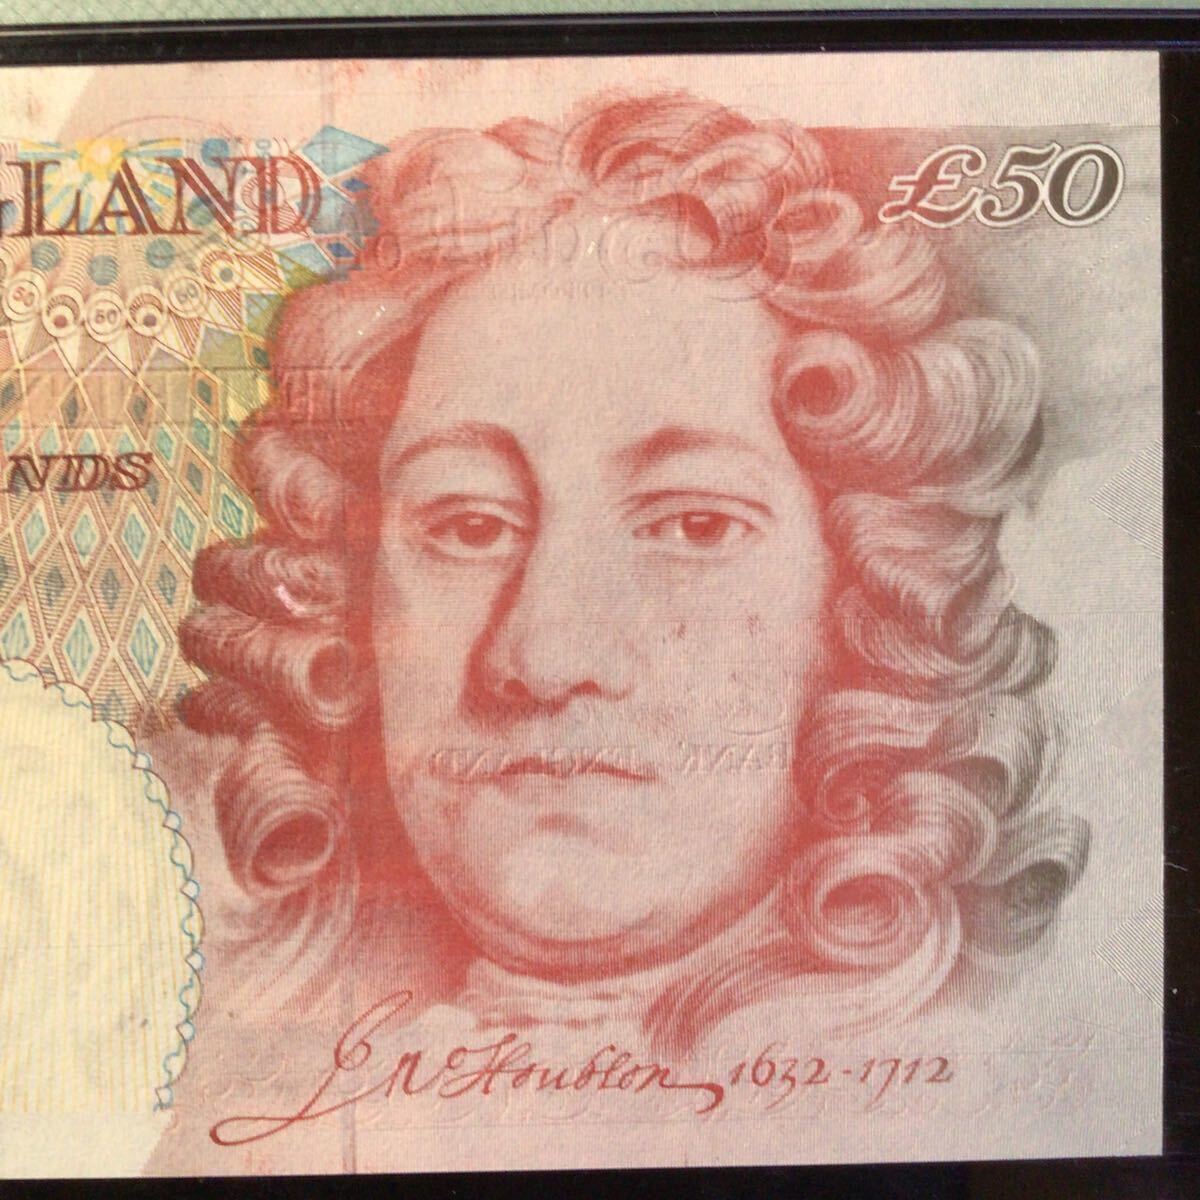 World Banknote Grading GREAT BRITAIN《Bank of England》50 Pounds【1994】『PMG Grading Gem Uncirculated 66 EPQ』_画像7